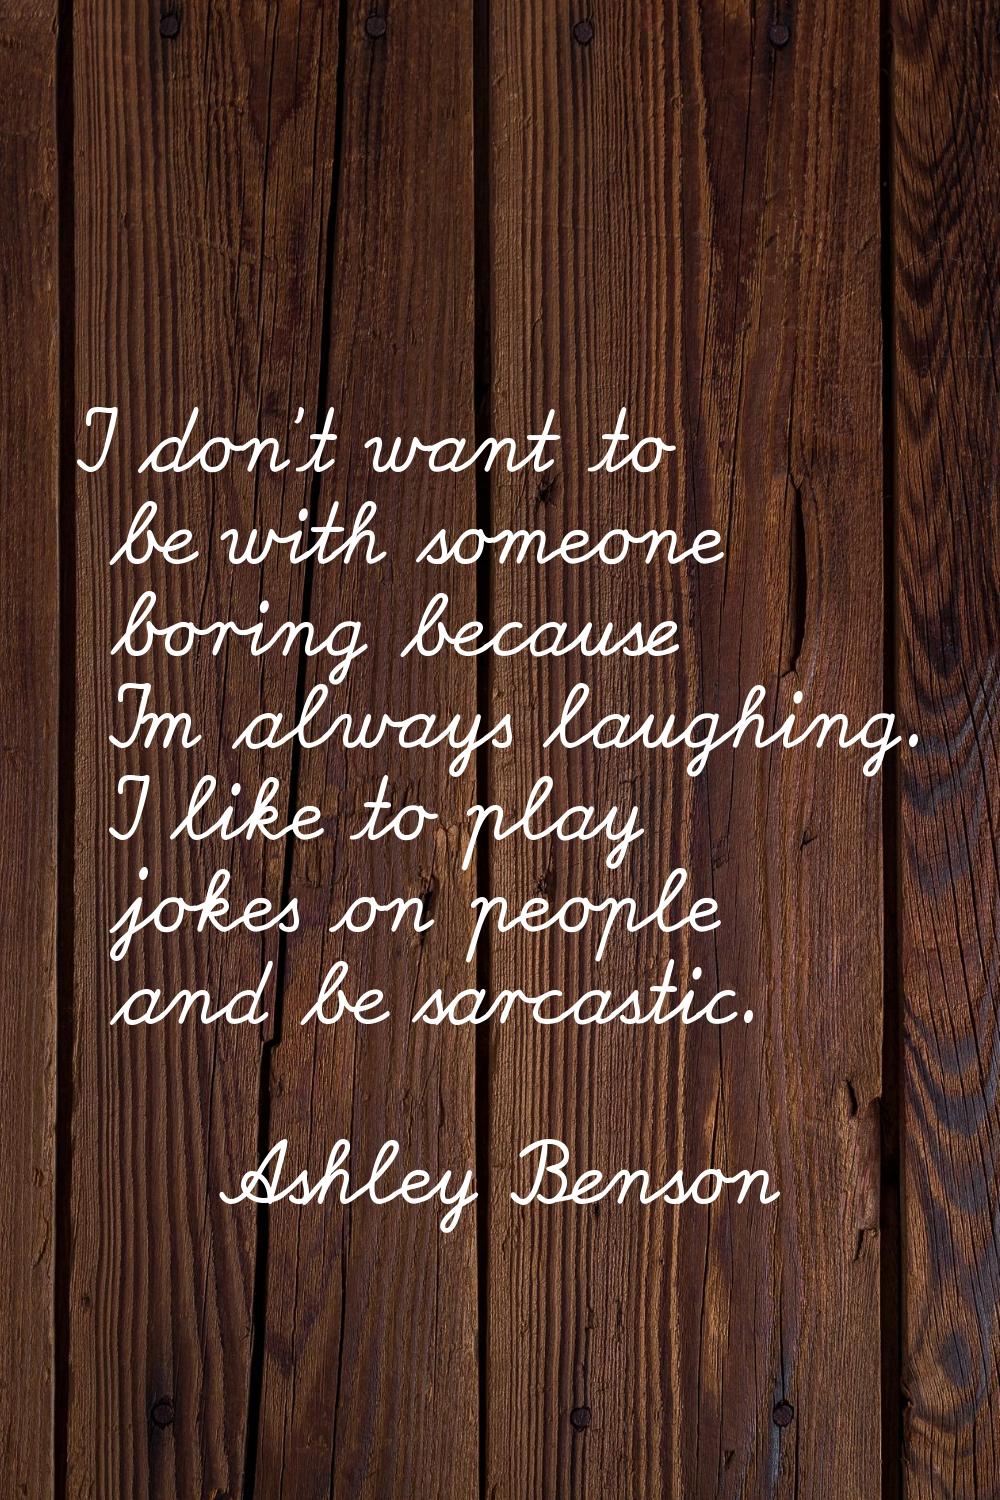 I don't want to be with someone boring because I'm always laughing. I like to play jokes on people 